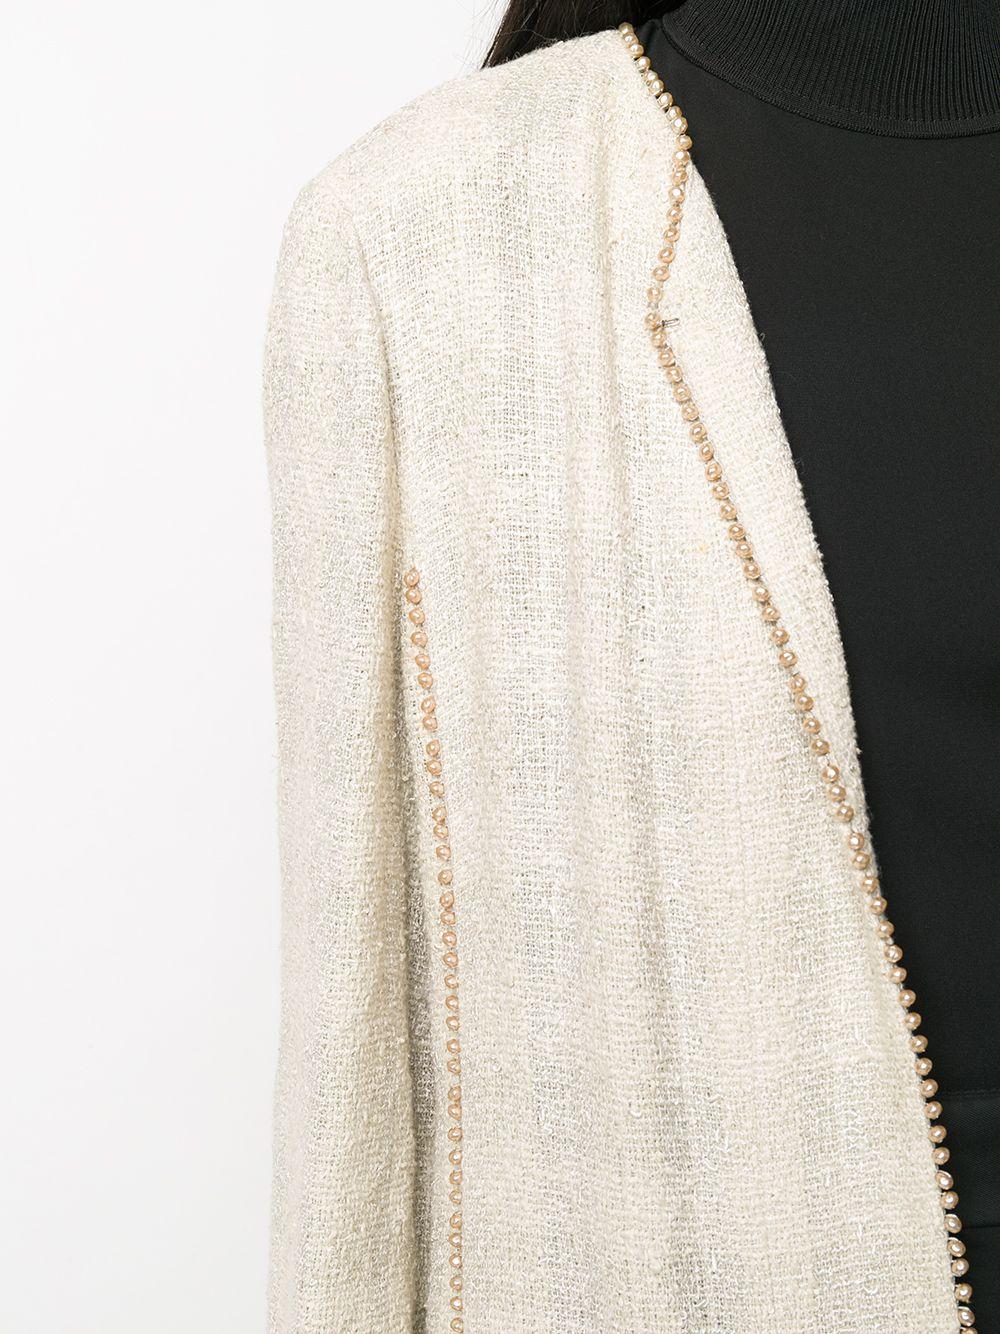 Chanel ivory mix wool beaded-trim jacket featuring a round neck, beads edges, hook and eye fastening, two front patch pockets. 
Estimated size: 40fr/US8/UK12
In excellent vintage condition. Made in France.
Composition: Coton 43%, Viscose 42%, Laine